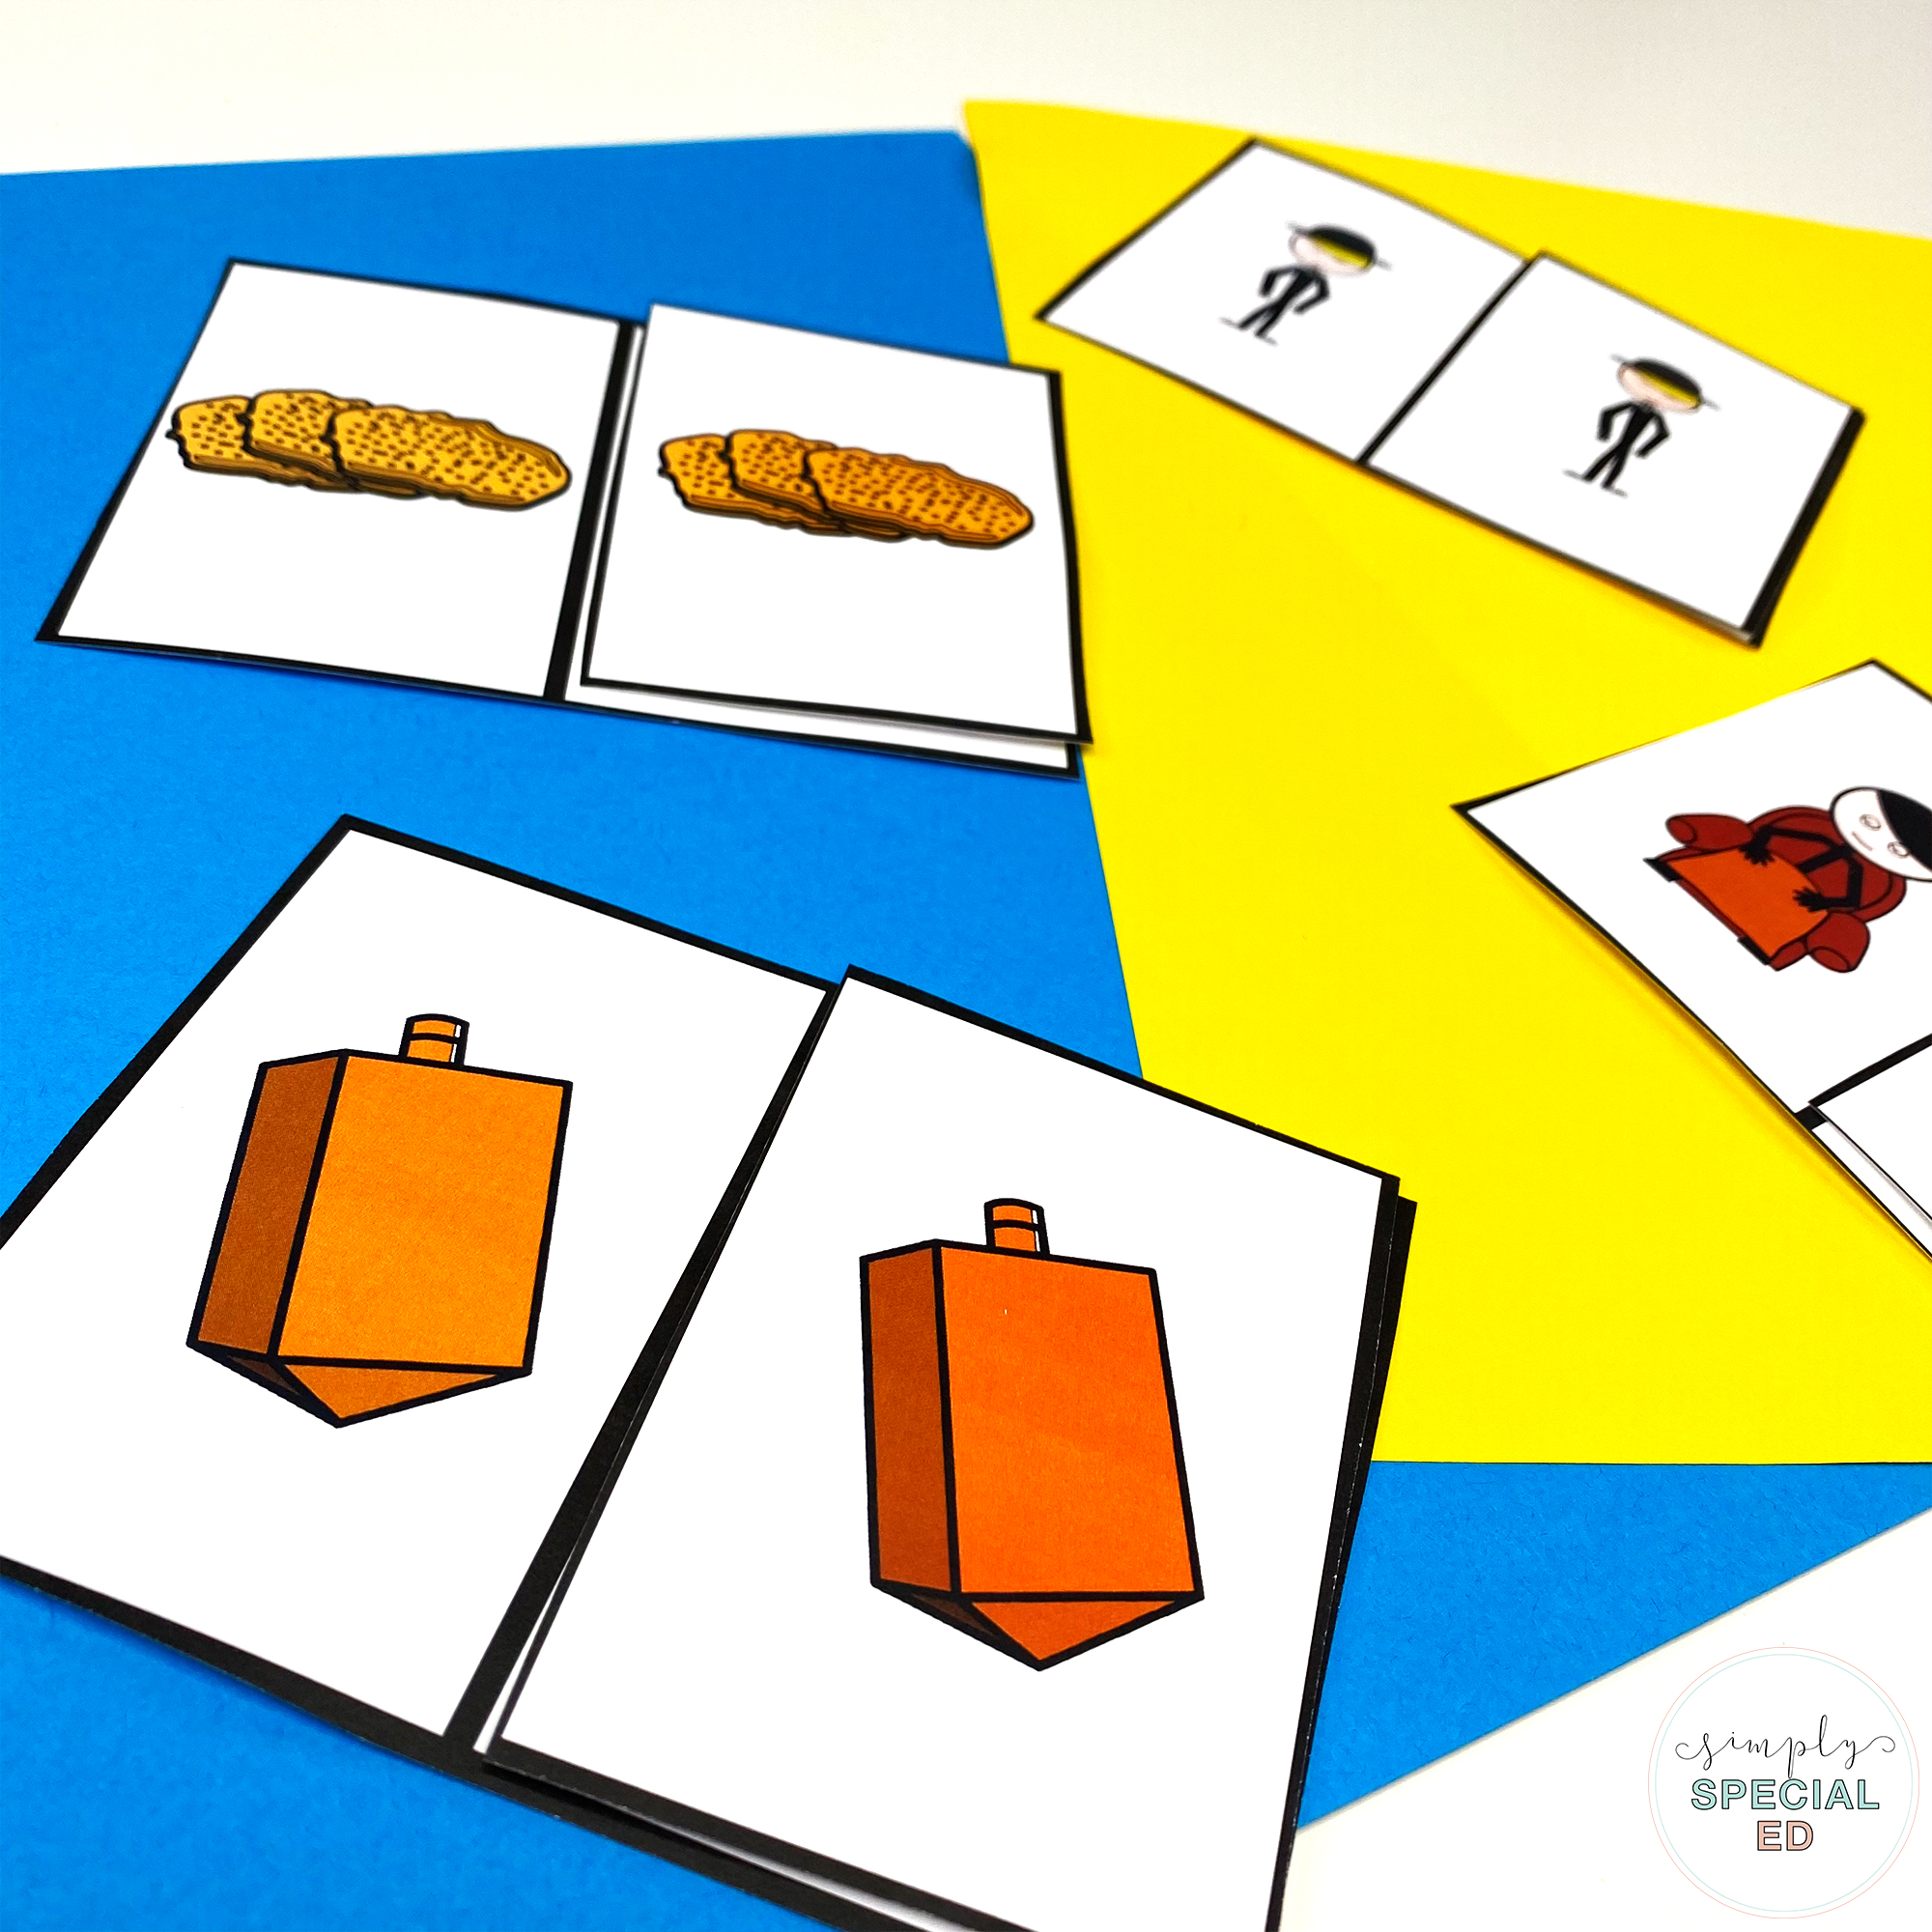 The best Adapted activities for the book Hanukkah bear and cooking latkes in your special education classroom. 